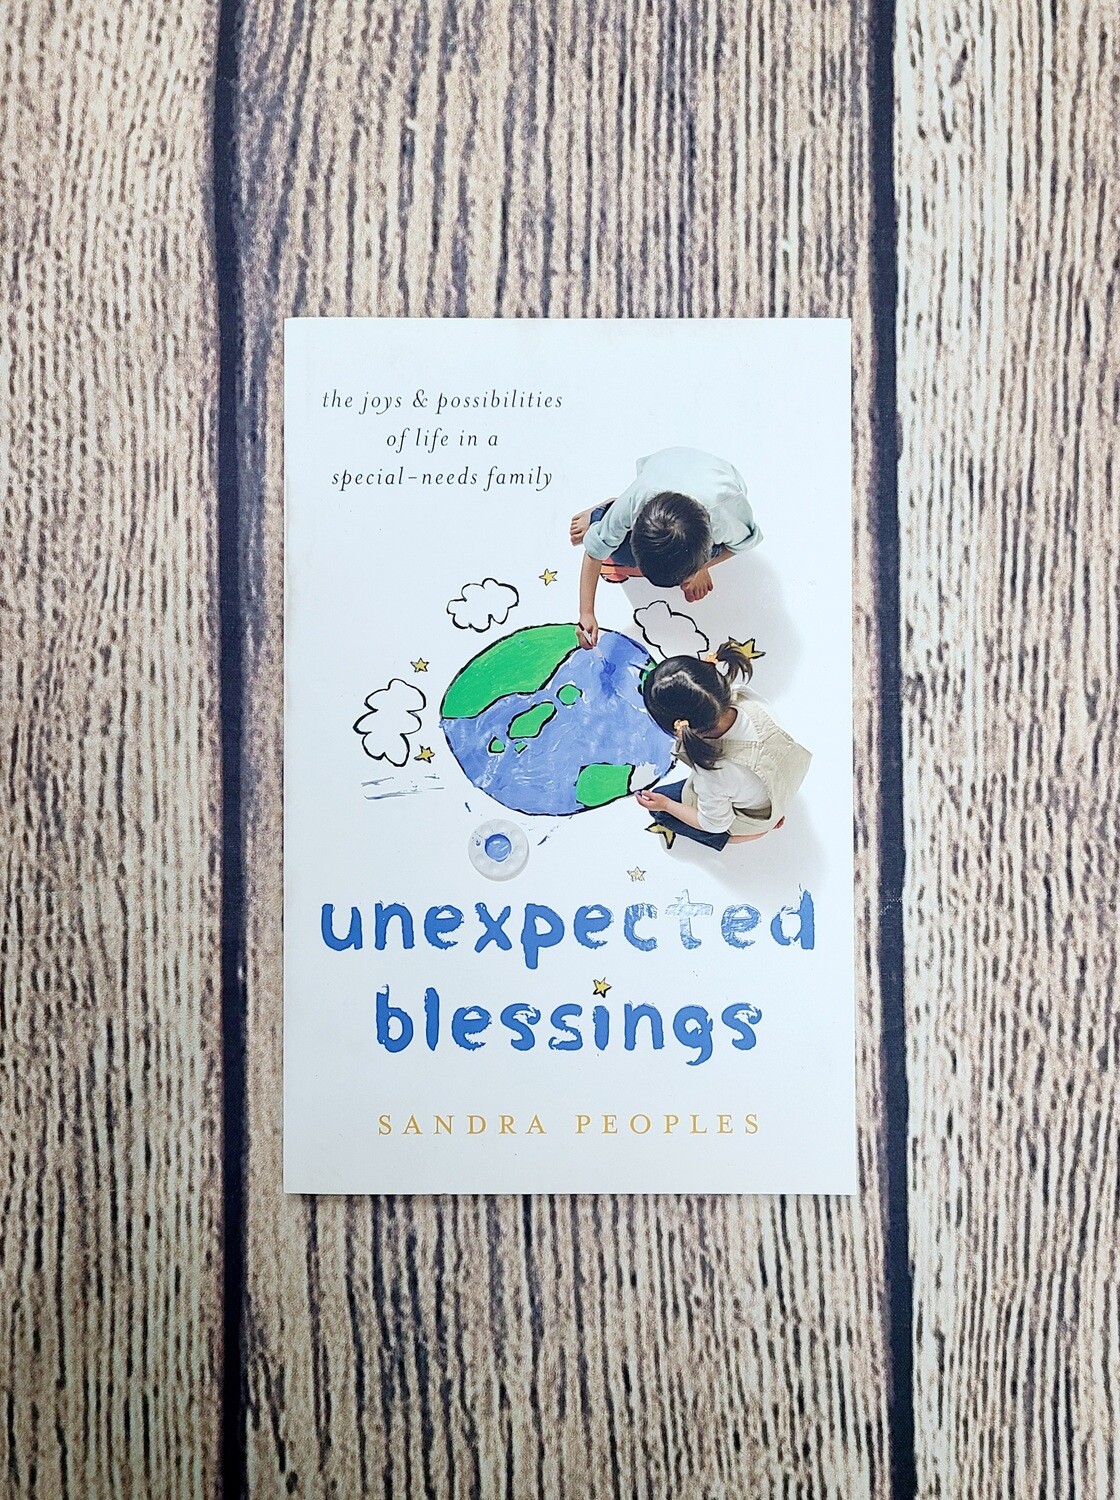 Unexpected Blessings: The Joys and Possibilities of Life in a Special-Needs Family by Sandra Peoples